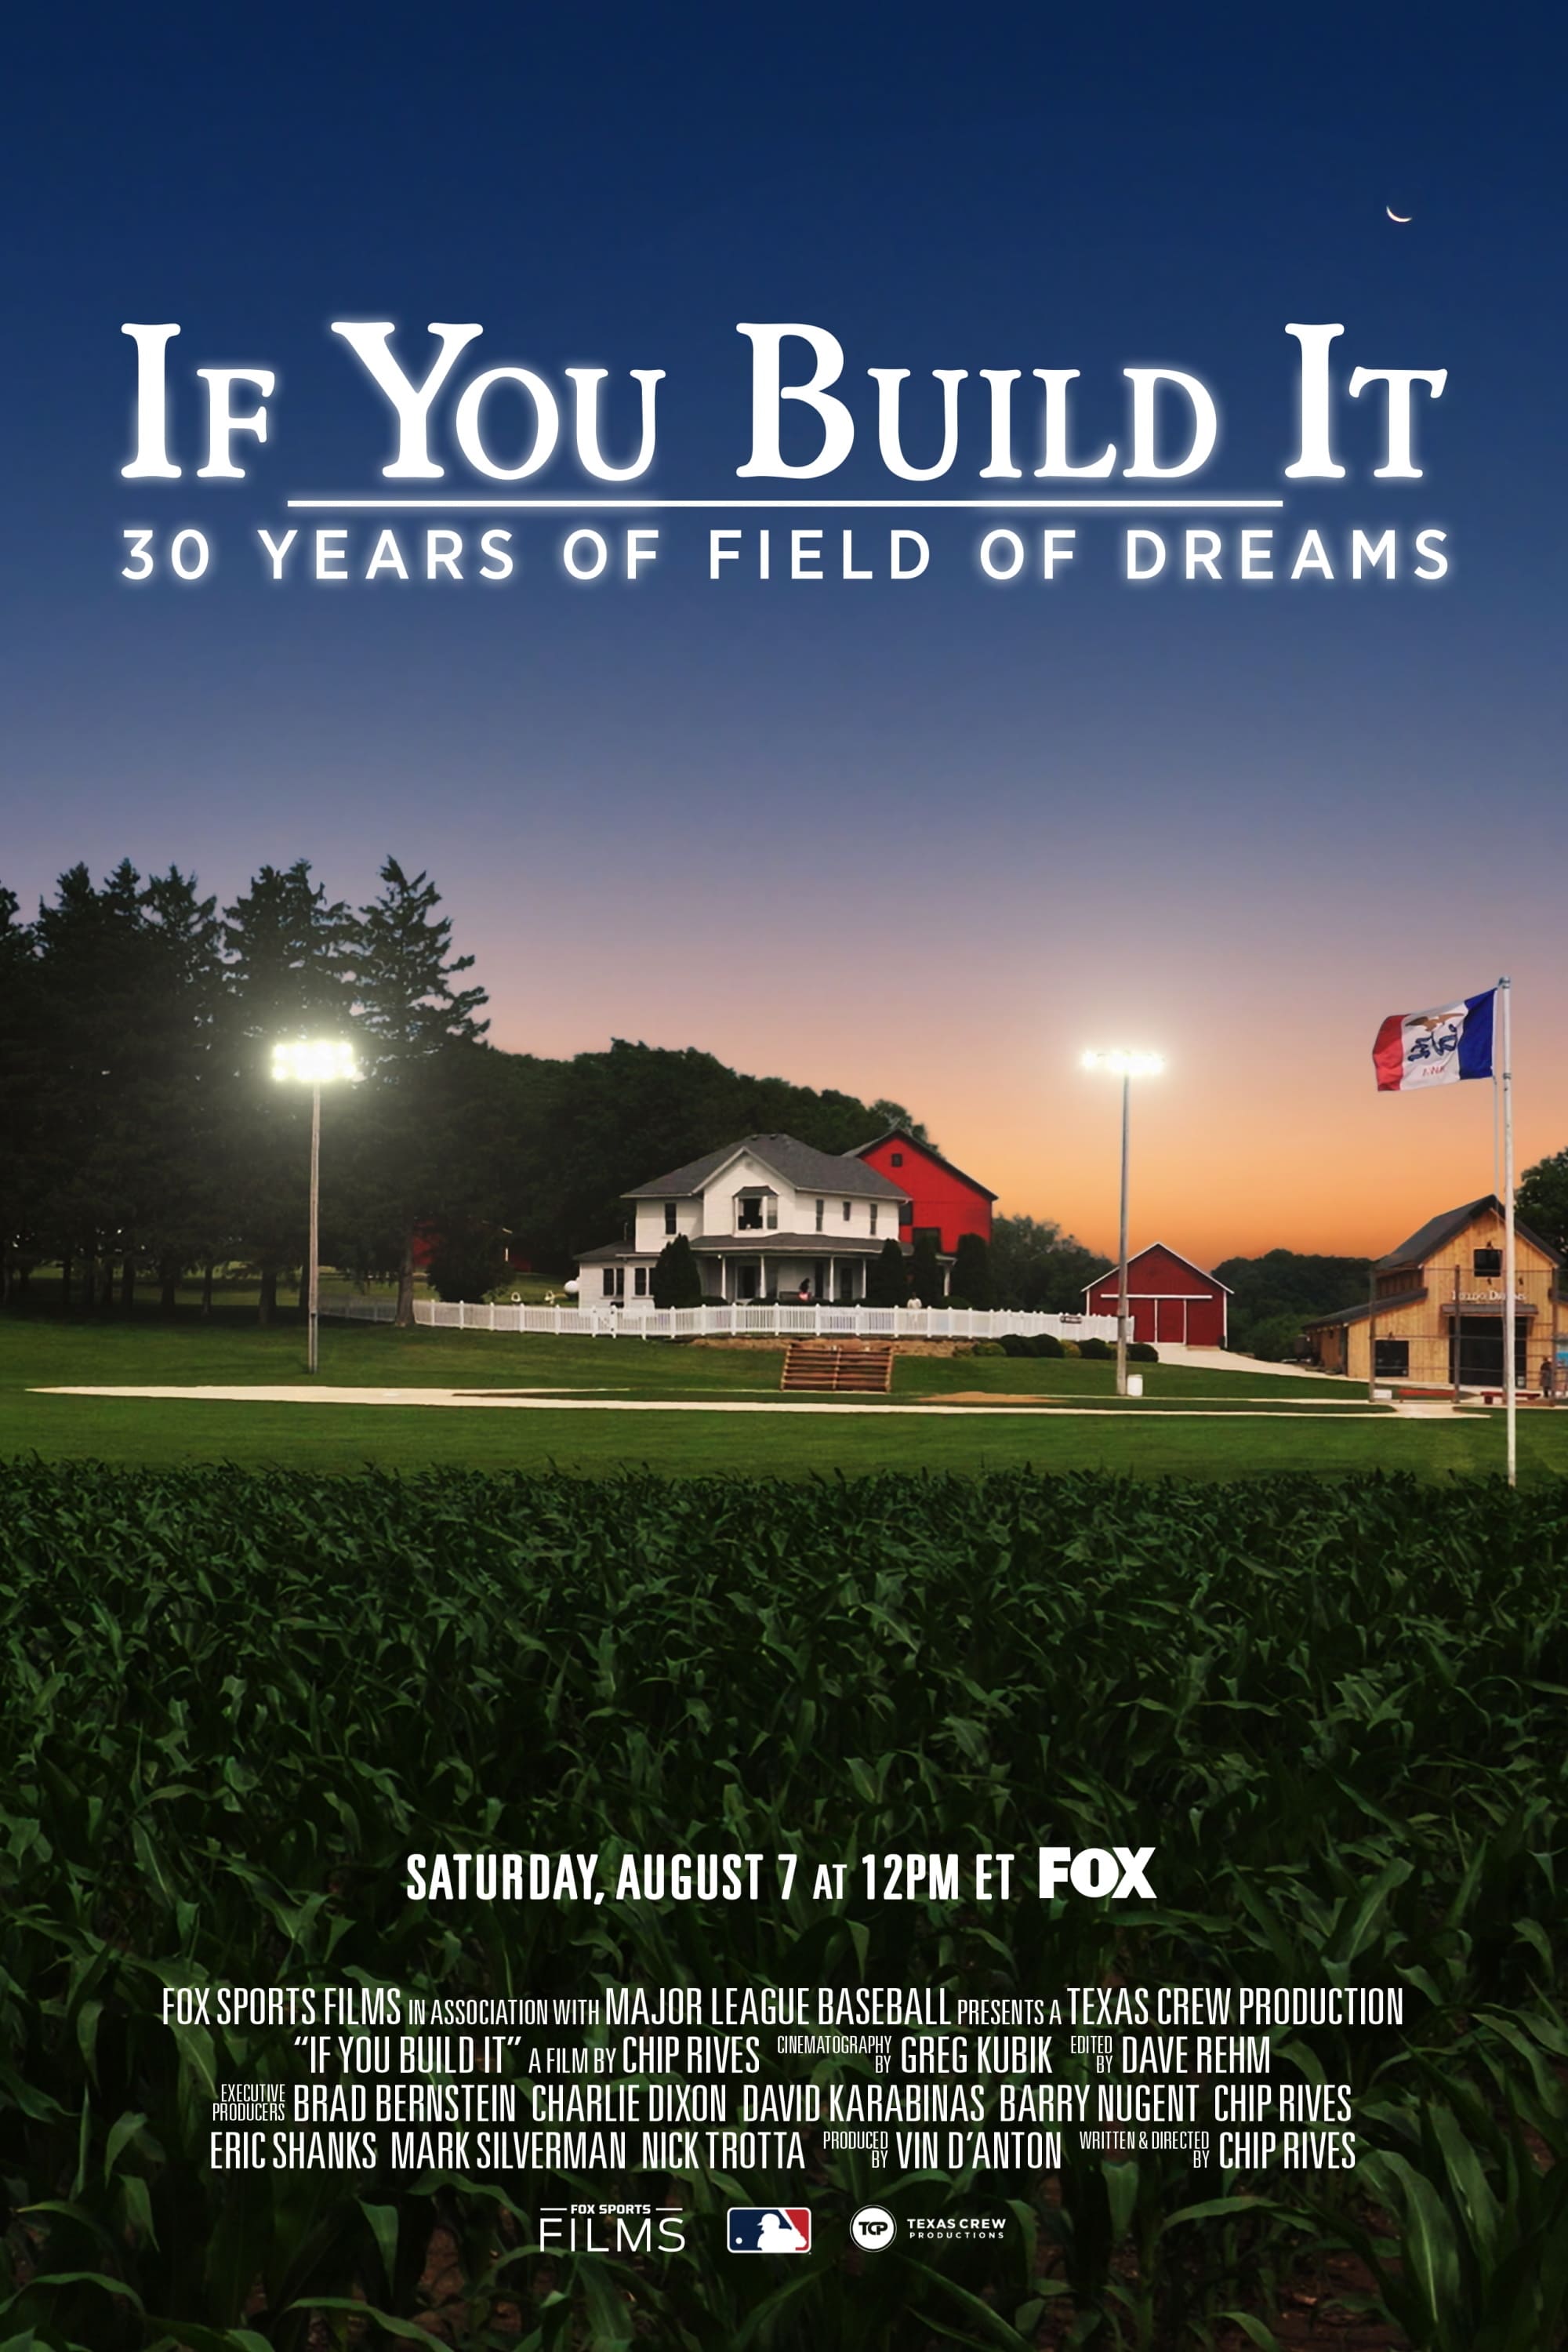 If You Build It: 30 Years of Field of Dreams